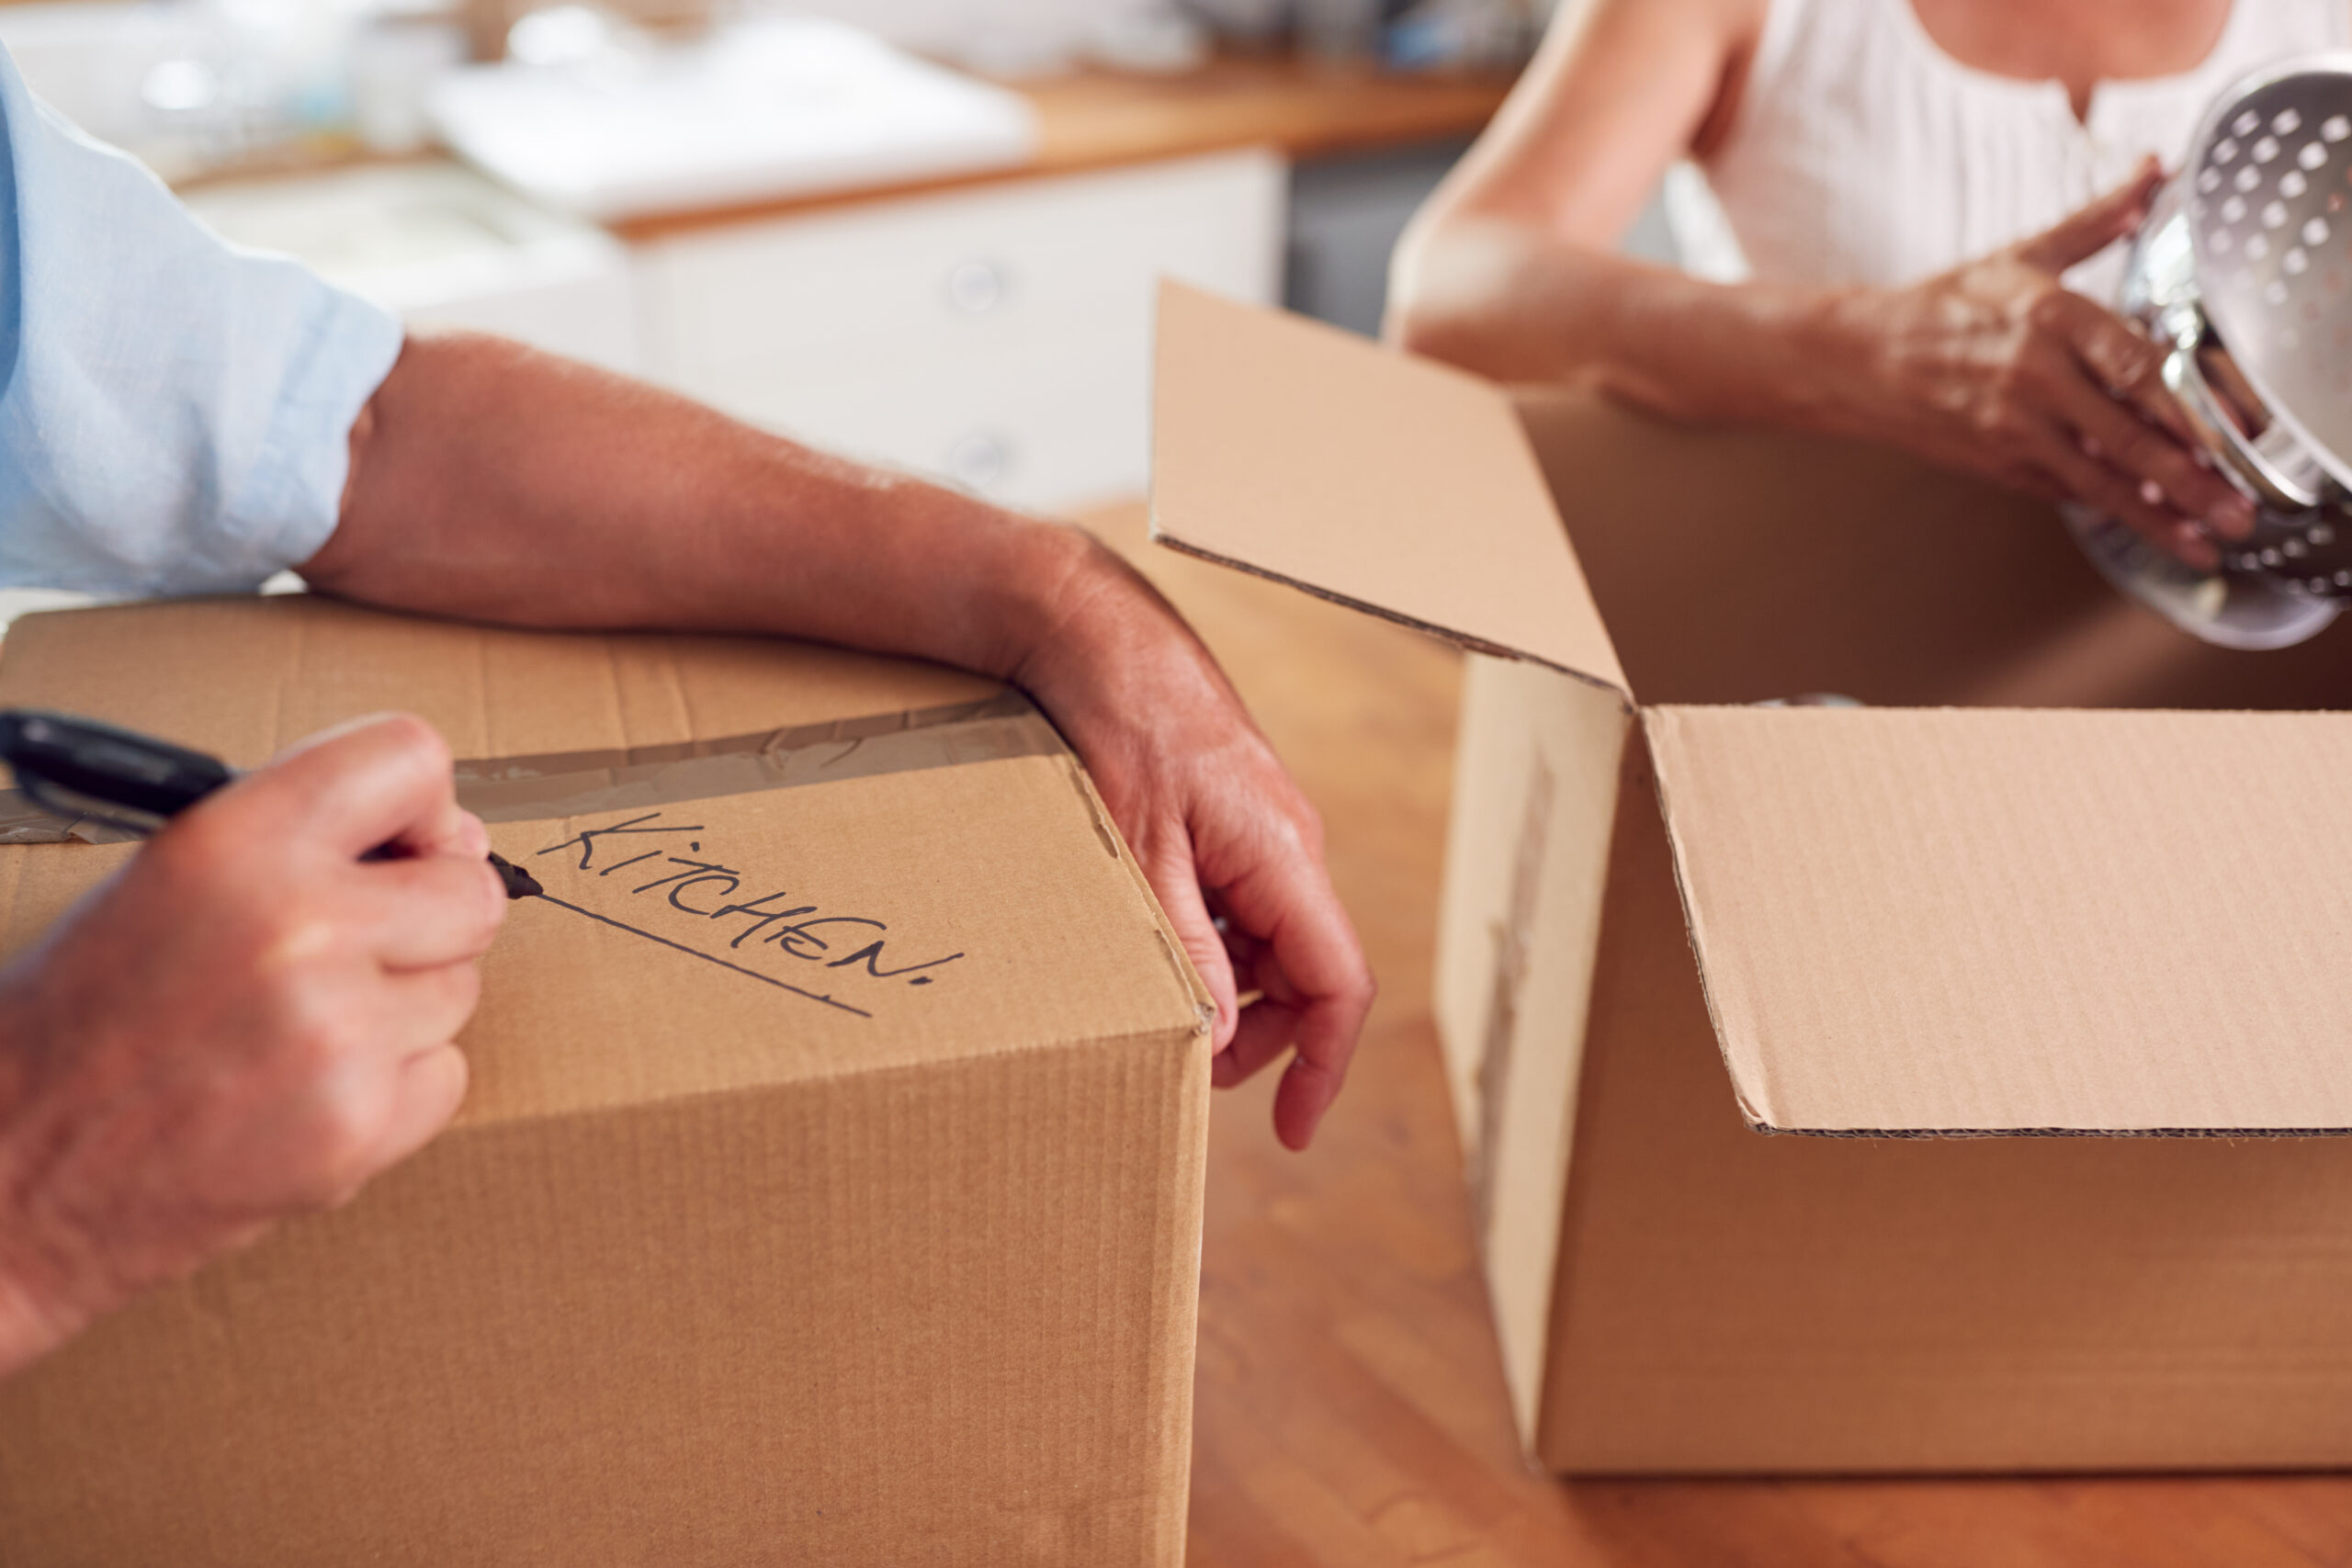 senior downsizing into a retirement community by packing up personal items into boxes